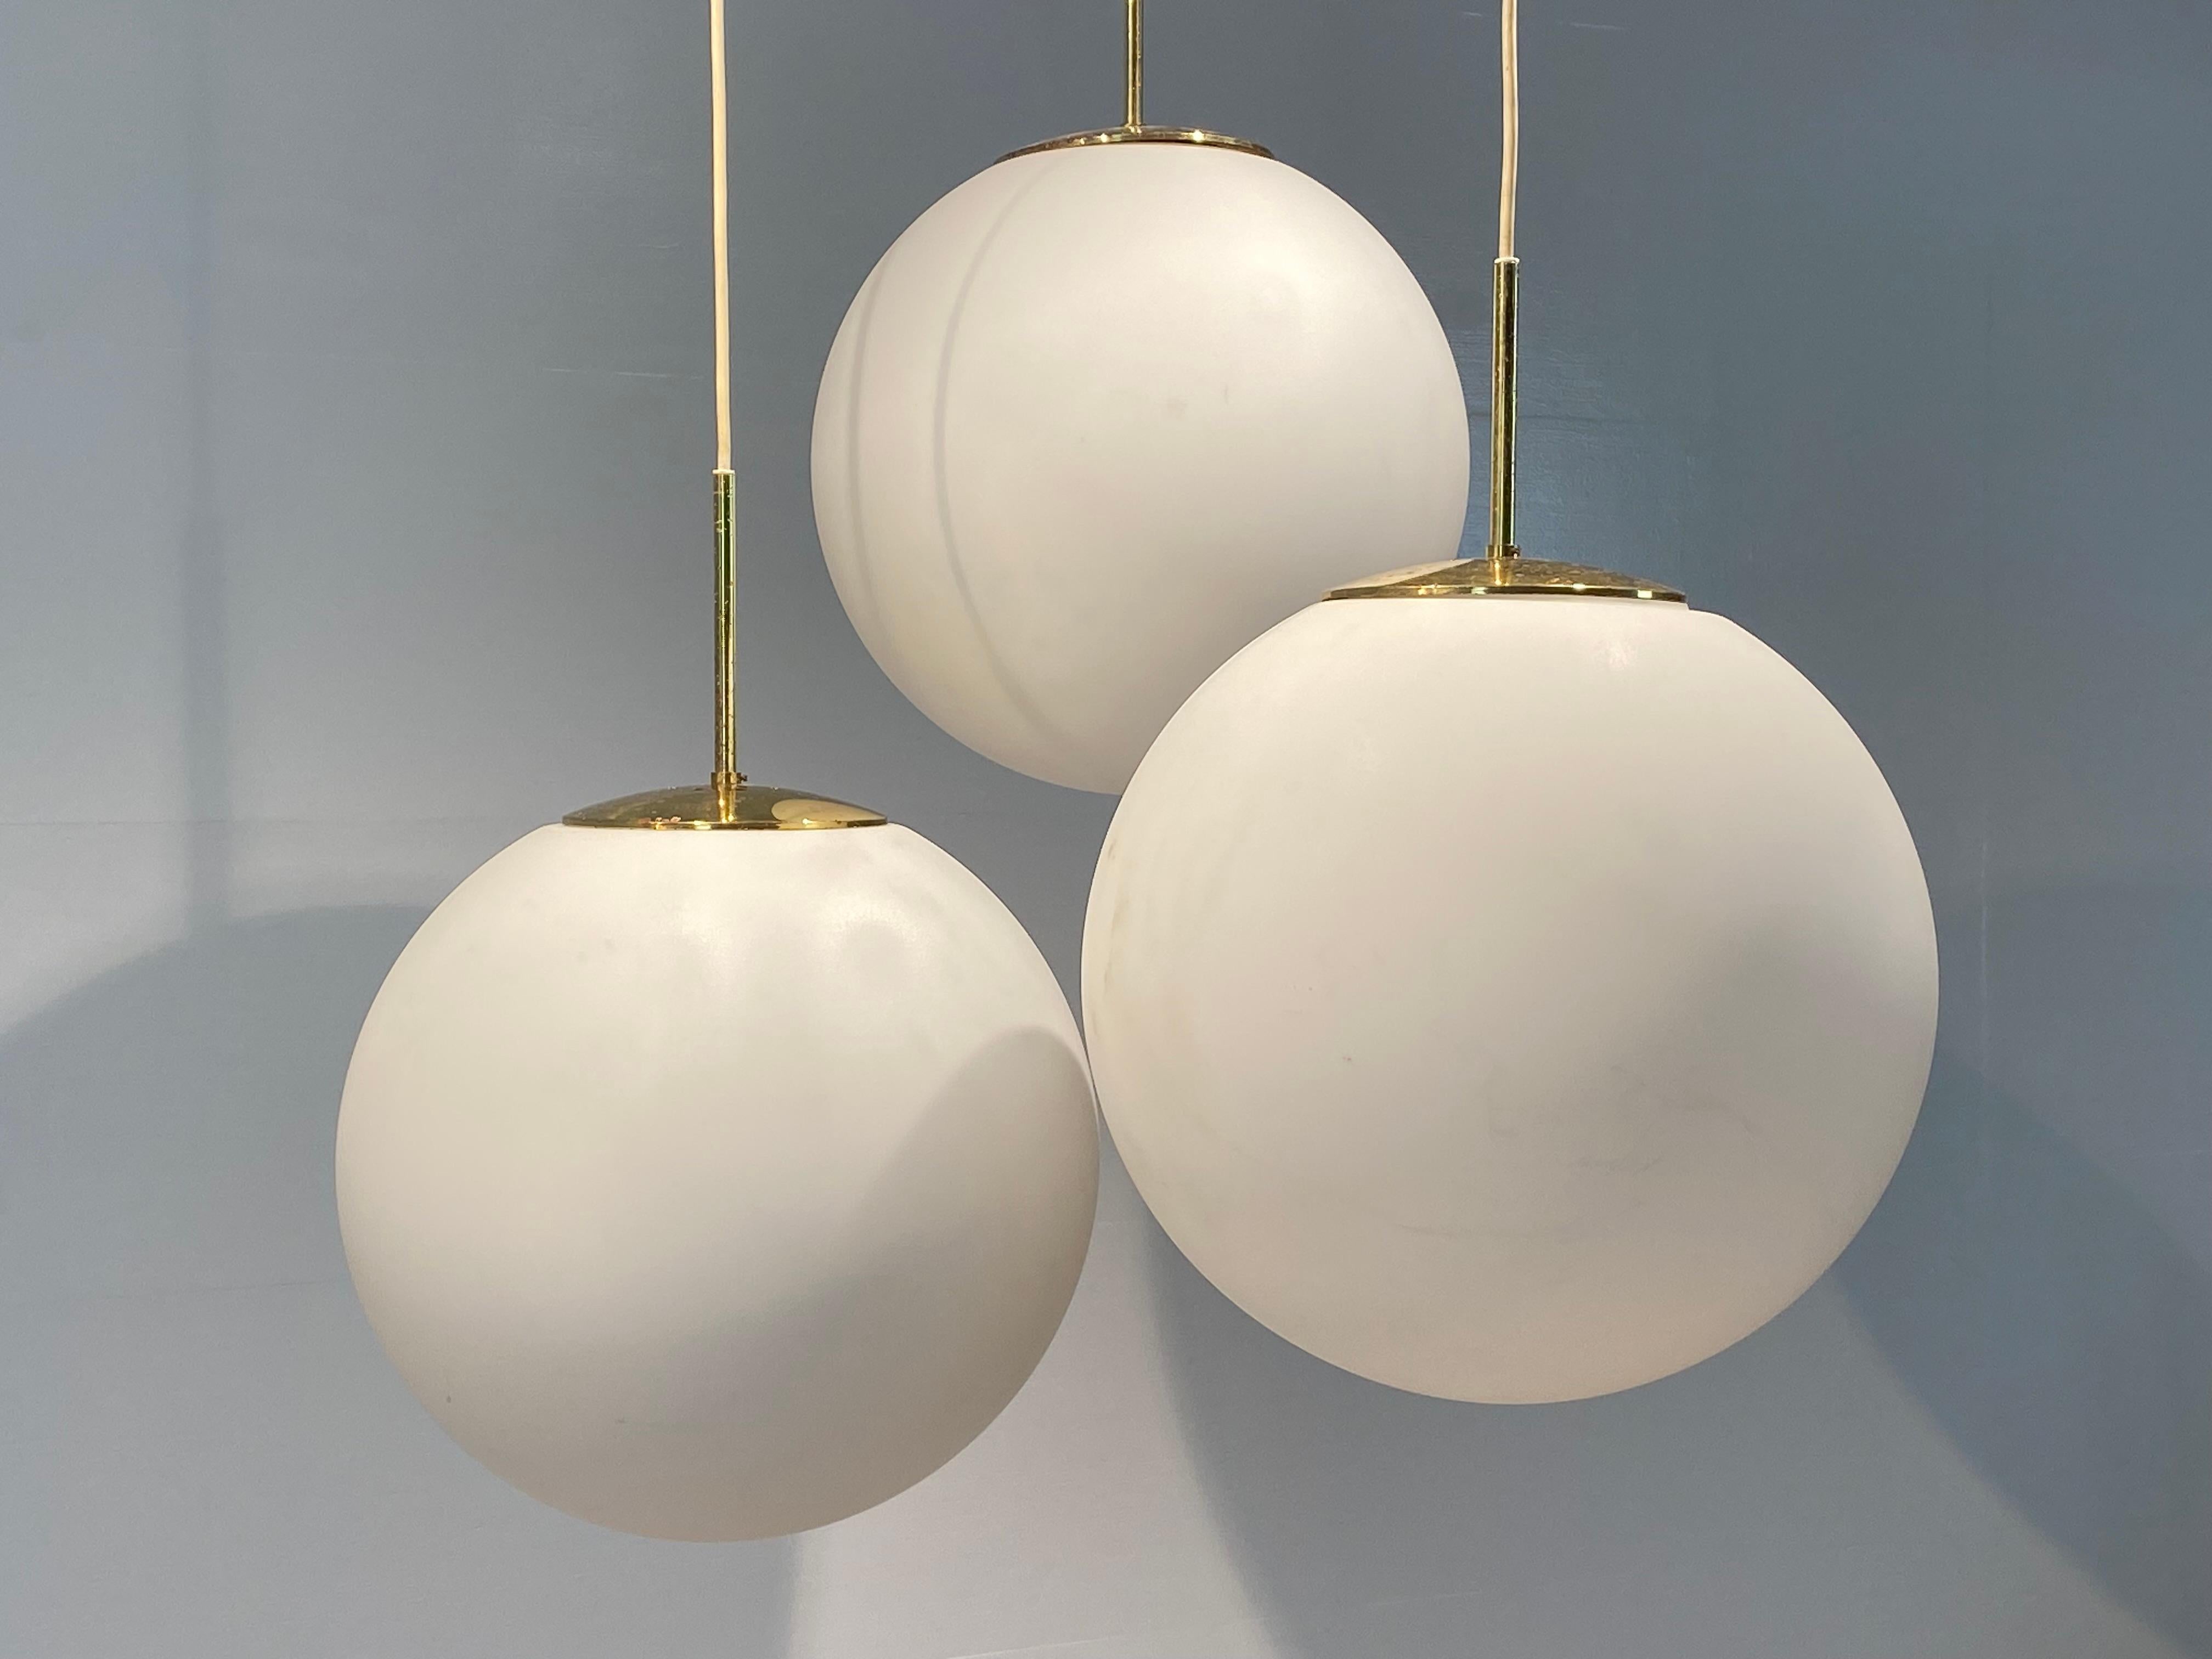 Exceptional Set of 3 Vintage Sandblasted Glass Balls,
Germany from around  the 1970 ies,
all is original, fittings etc...,
the lamps can be hung in different heights ,
great shine and patina of the Glass,
very decorative lighting objets